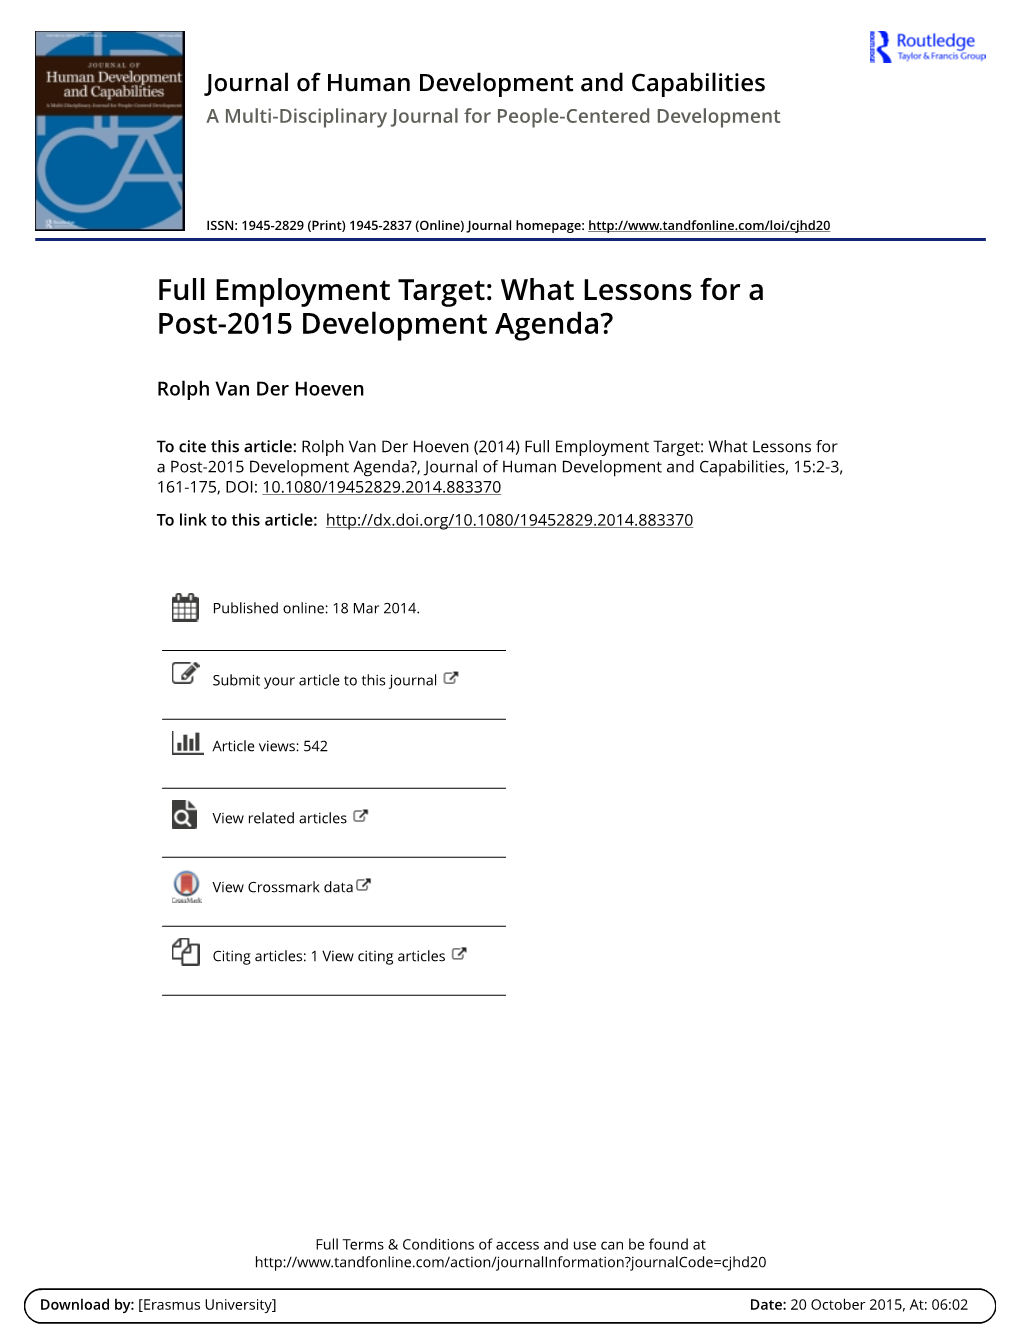 Full Employment Target: What Lessons for a Post-2015 Development Agenda?